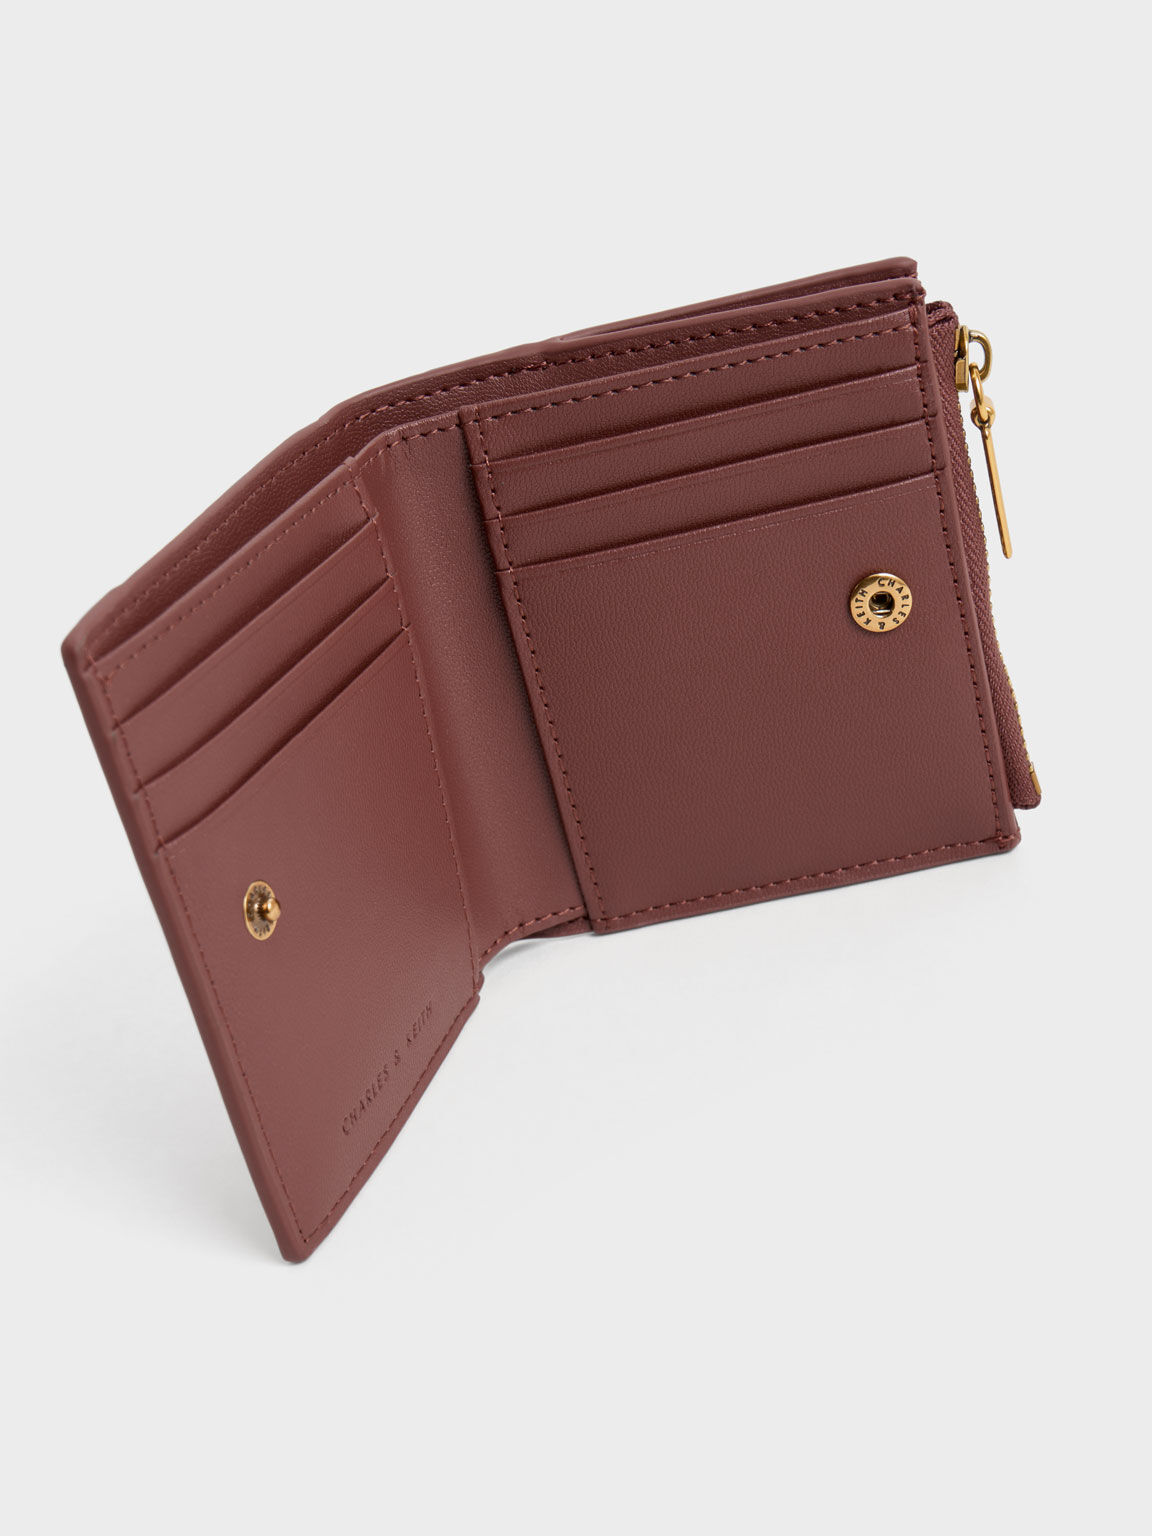 Ruched Short Wallet, Chocolate, hi-res